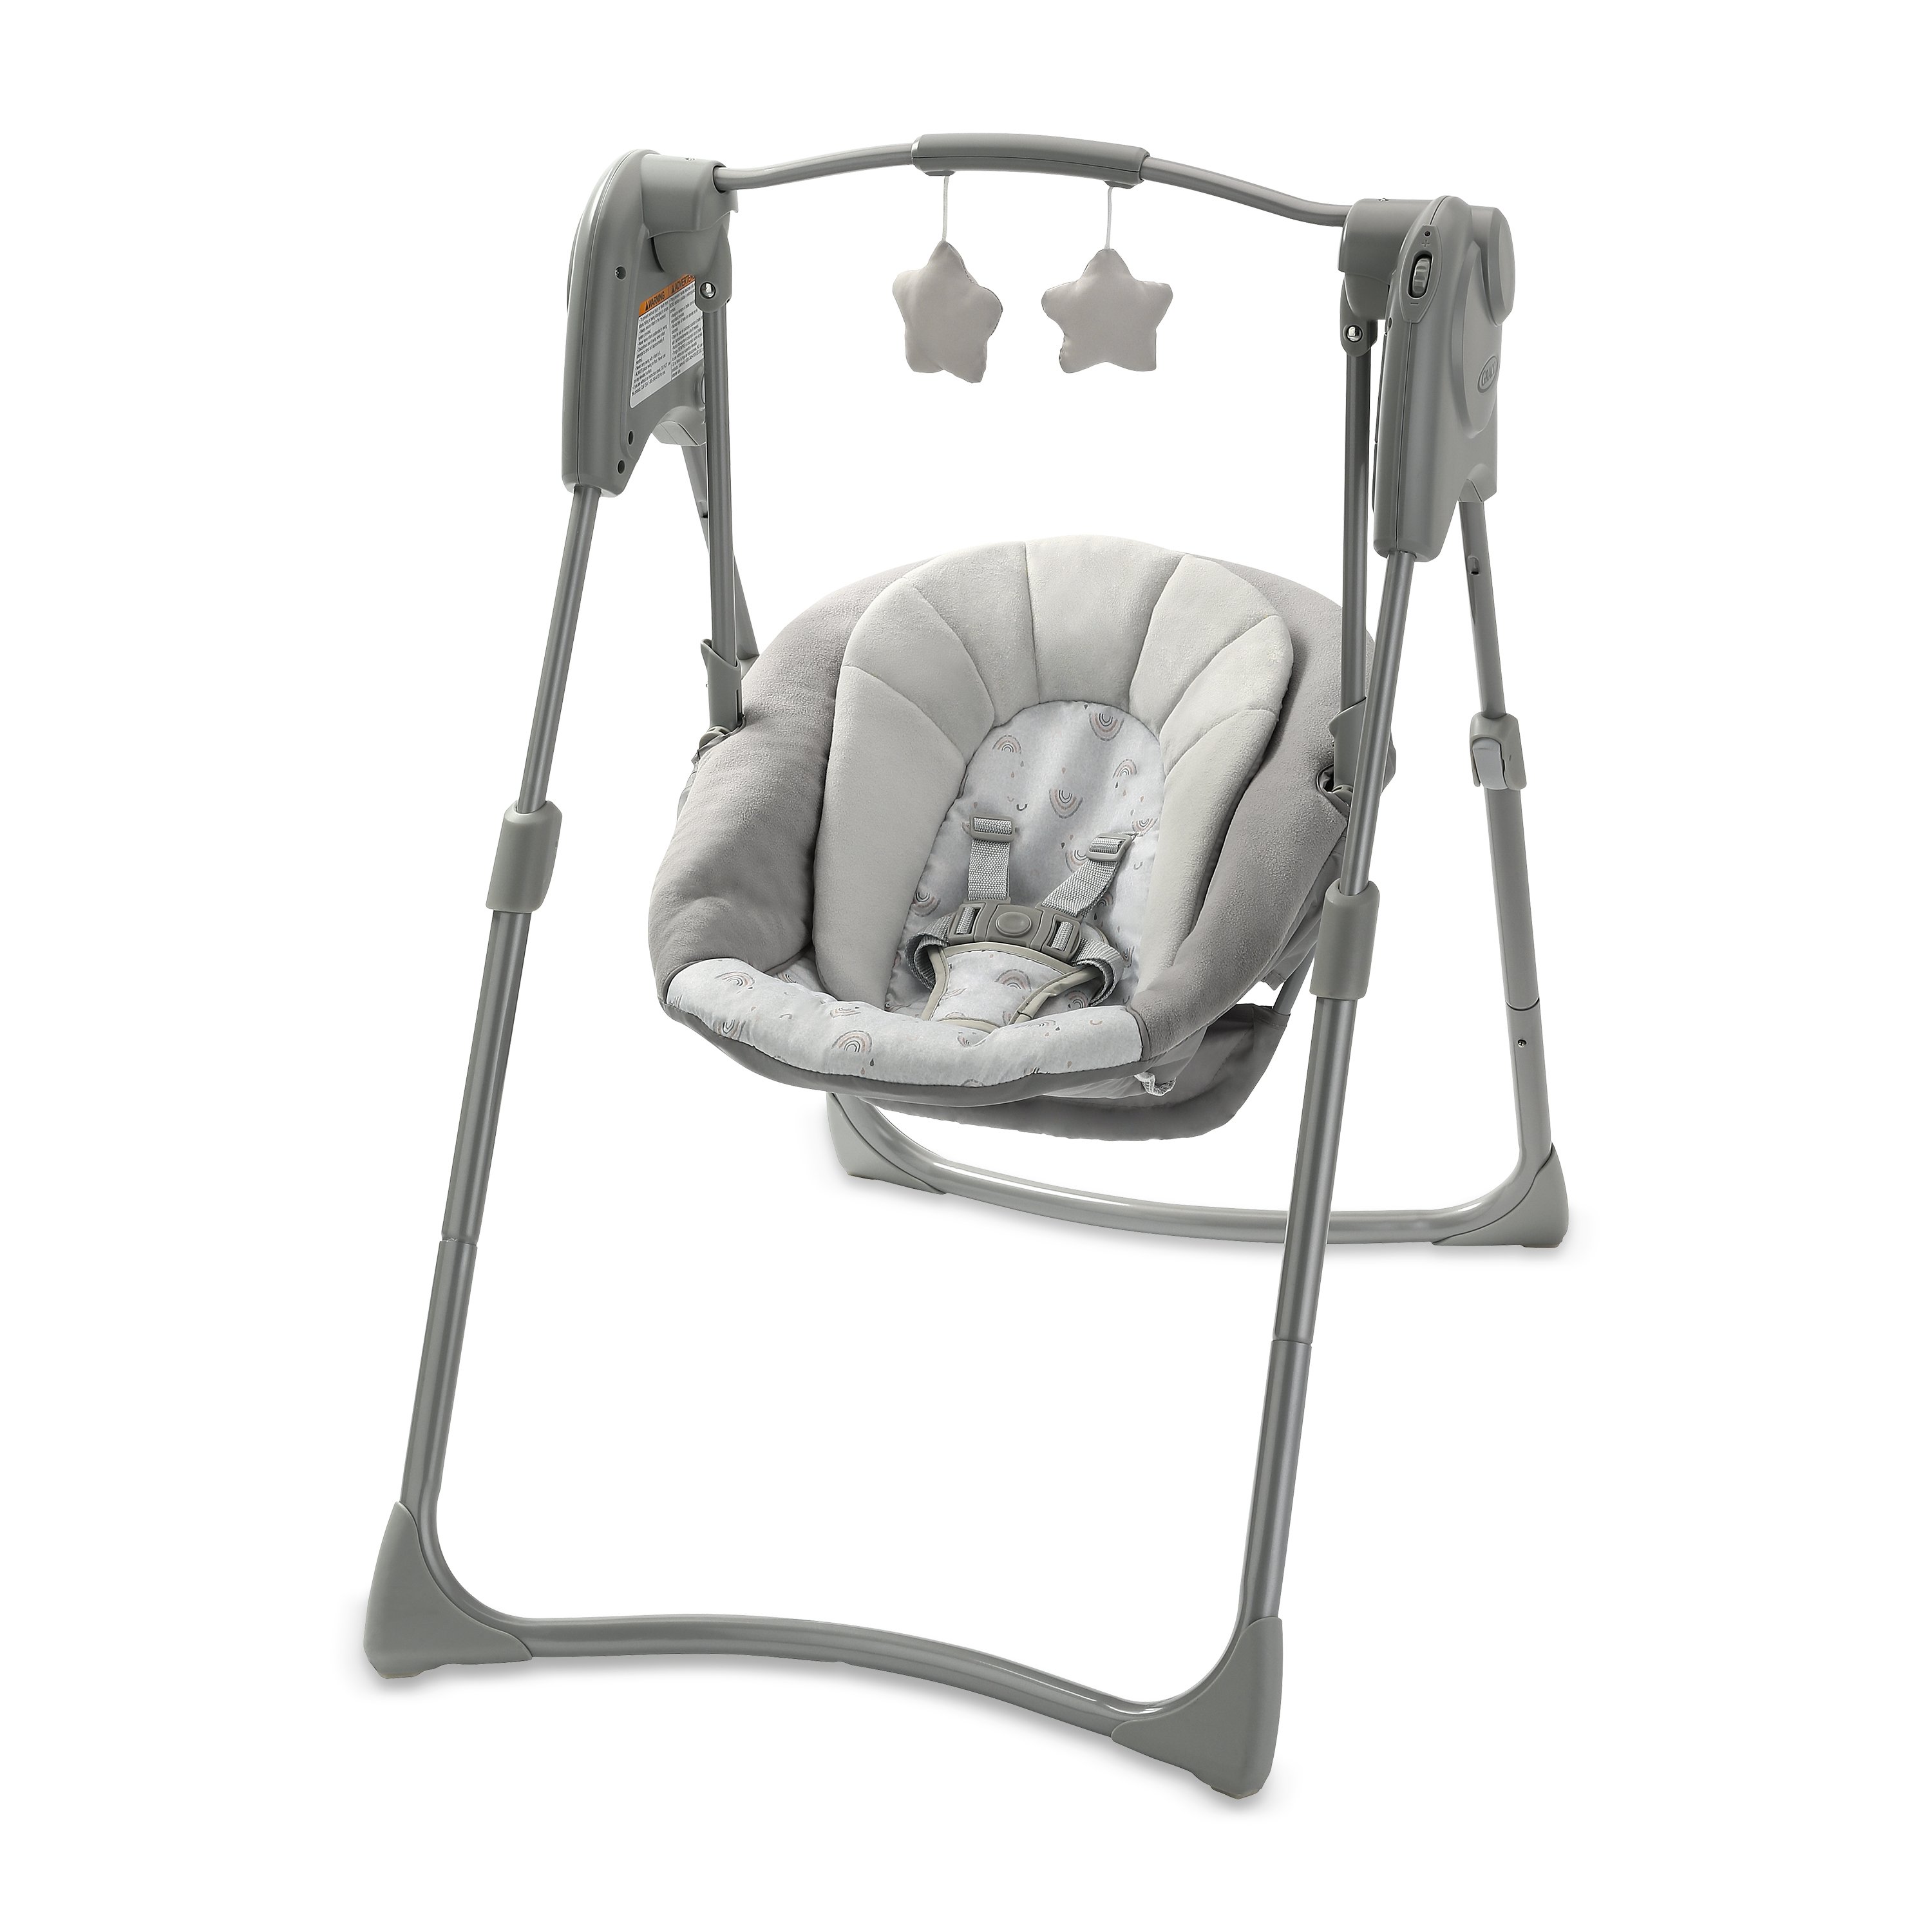 5 Speed Newborn Electric Swing With Tray